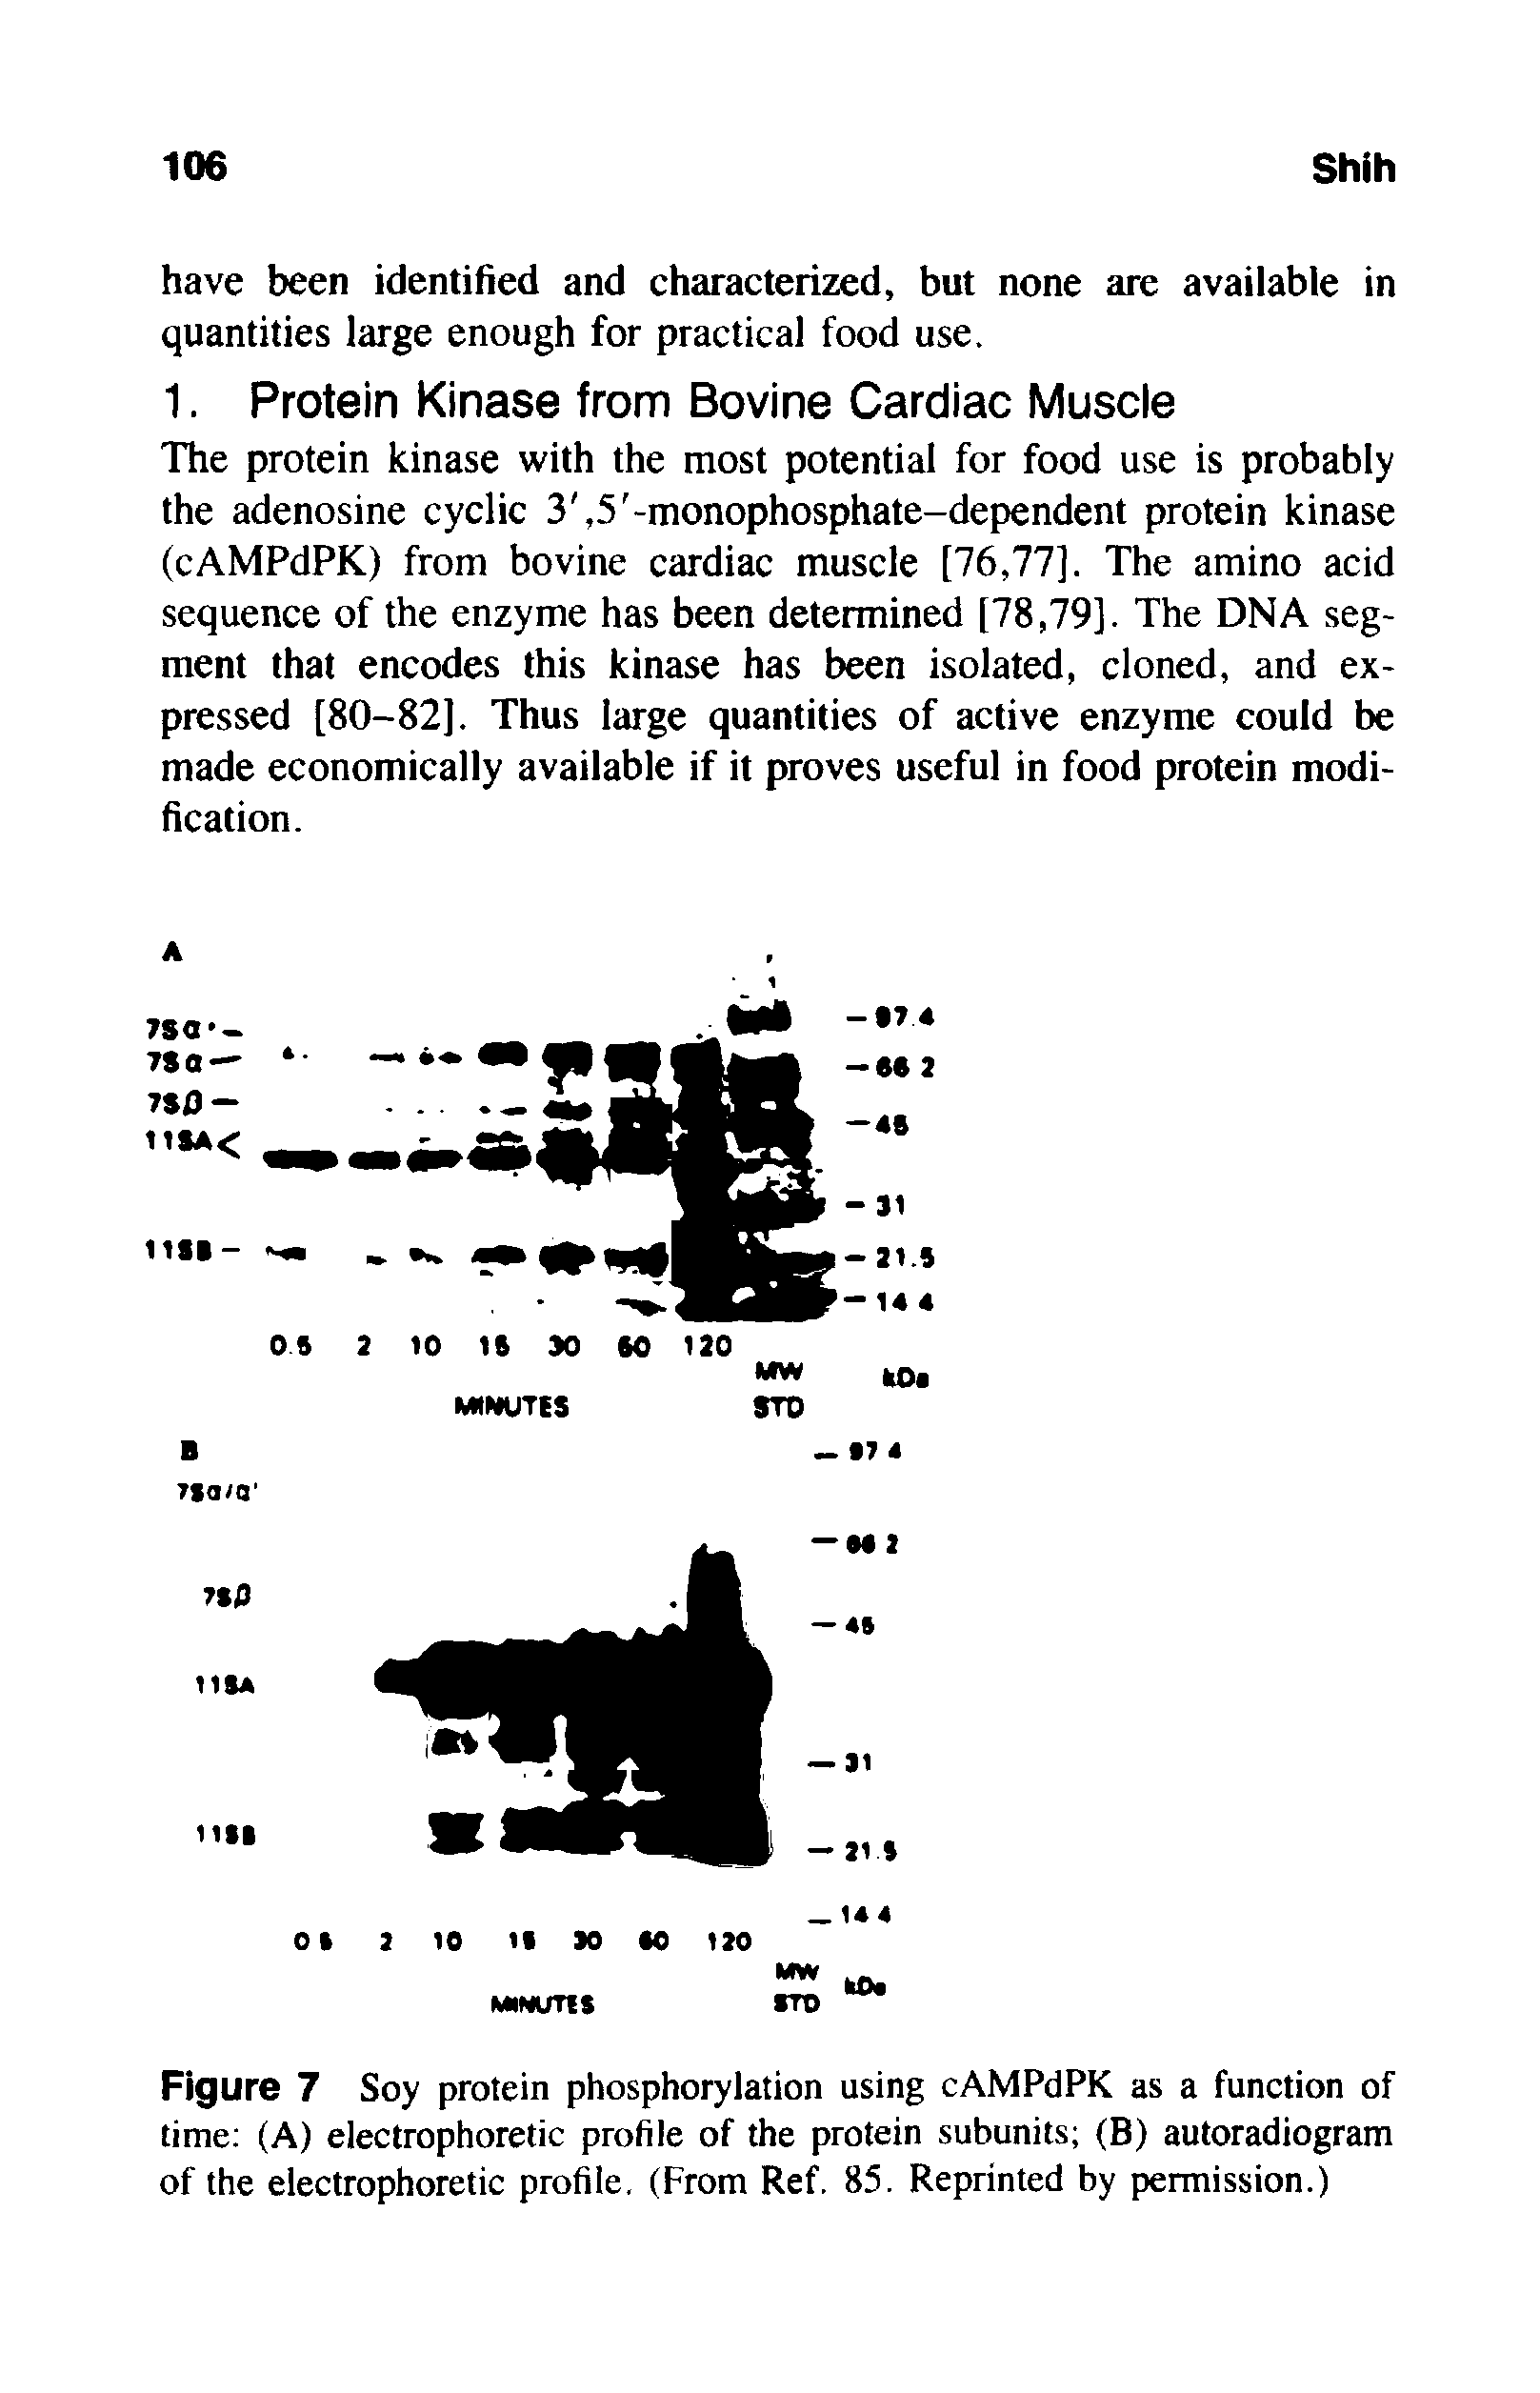 Figure 7 Soy protein phosphorylation using cAMPdPK as a function of time (A) electrophoretic profile of the protein subunits (B) autoradiogram of the electrophoretic profile. (From Ref. 85. Reprinted by permission.)...